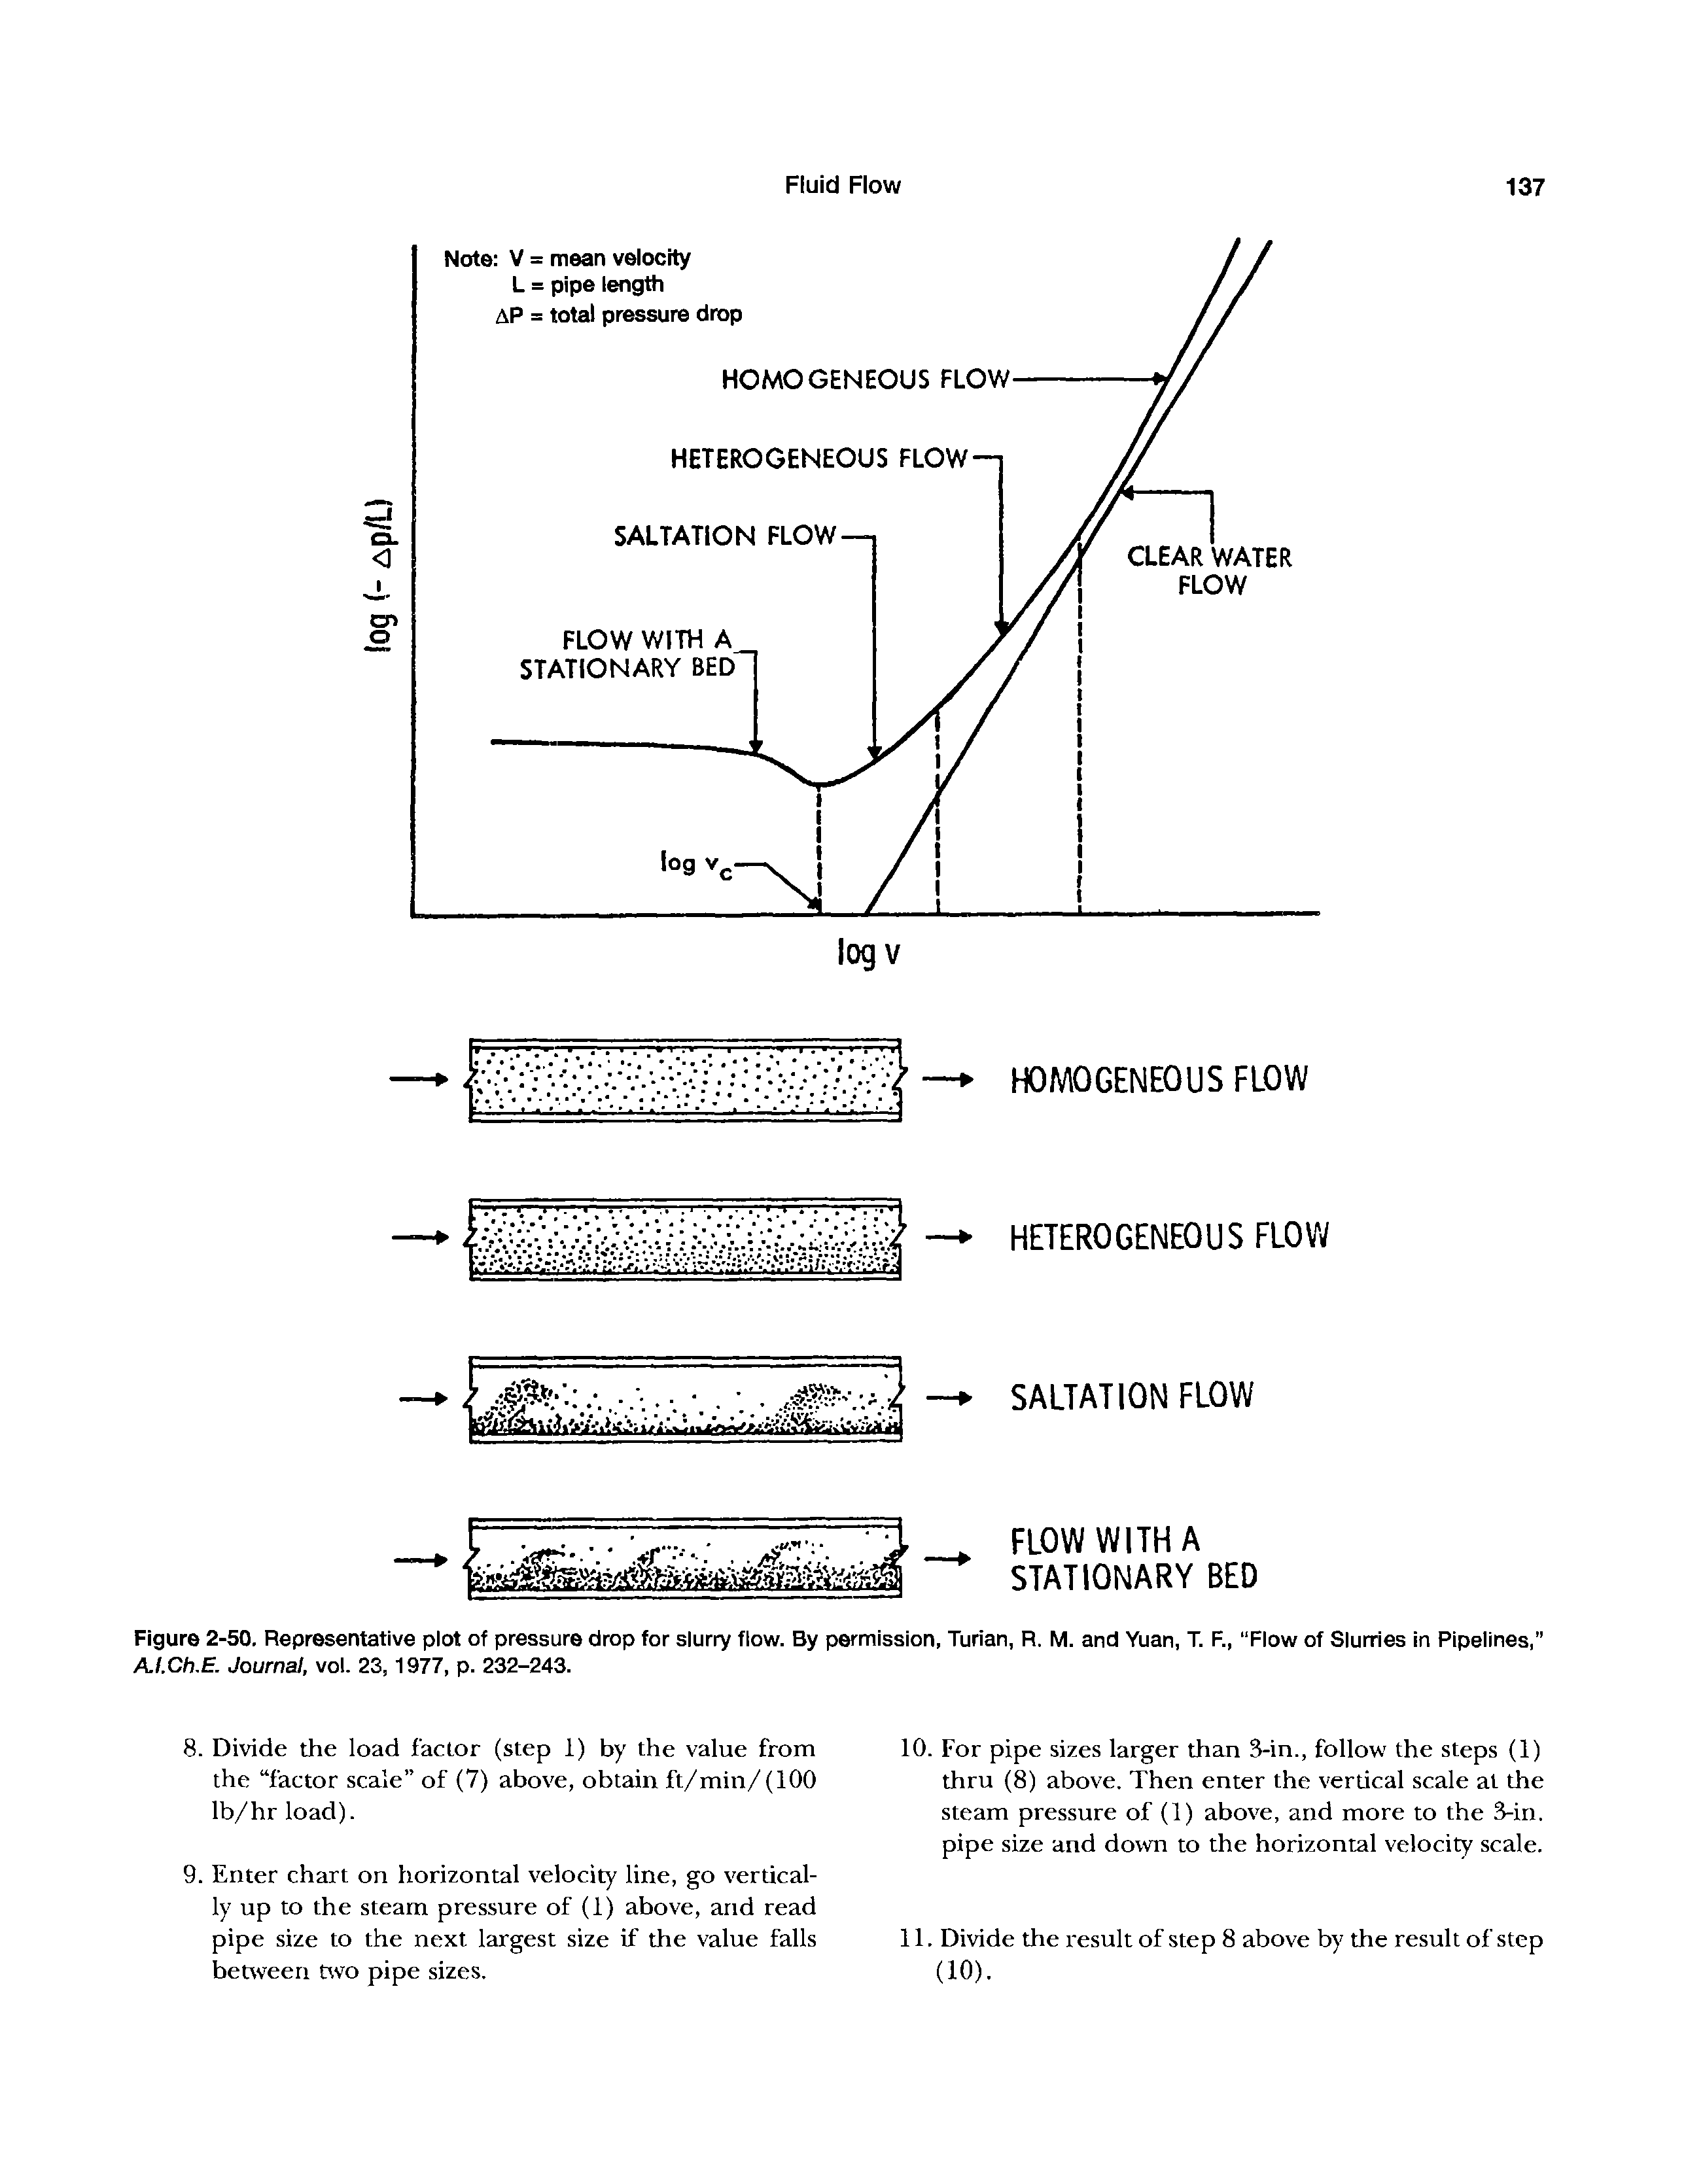 Figure 2-50. Representative plot of pressure drop for slurry flow. By permission, Turian, R. M. and Yuan, T. F., Flow of Slurries in Pipelines, AI.Ch.E. Journal, vol. 23, 1977, p. 232-243.